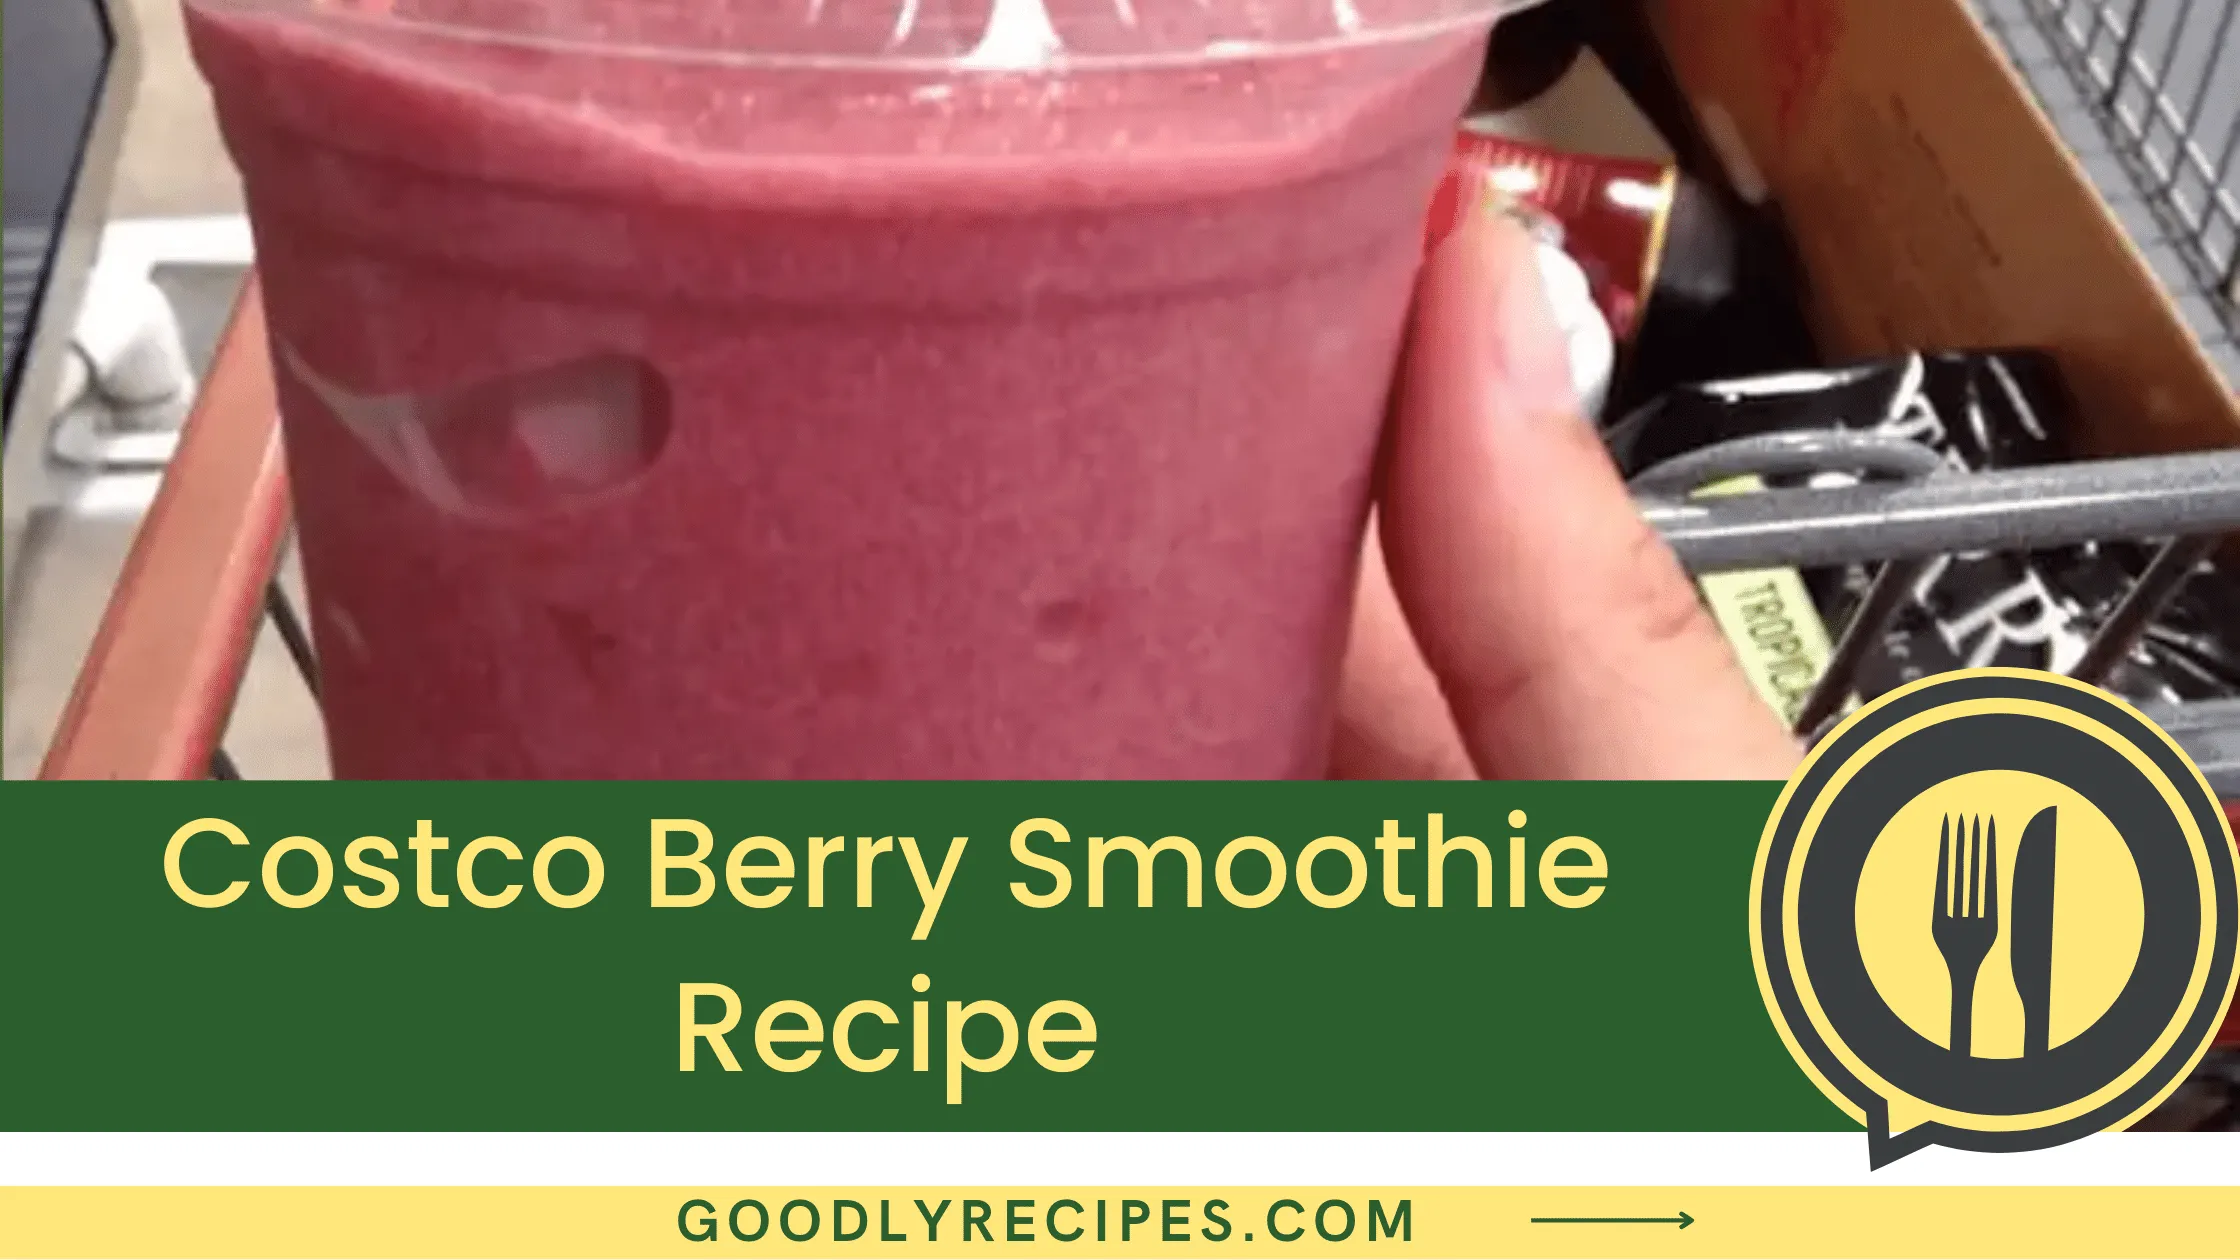 Costco Berry Smoothie Recipe - For Food Lovers